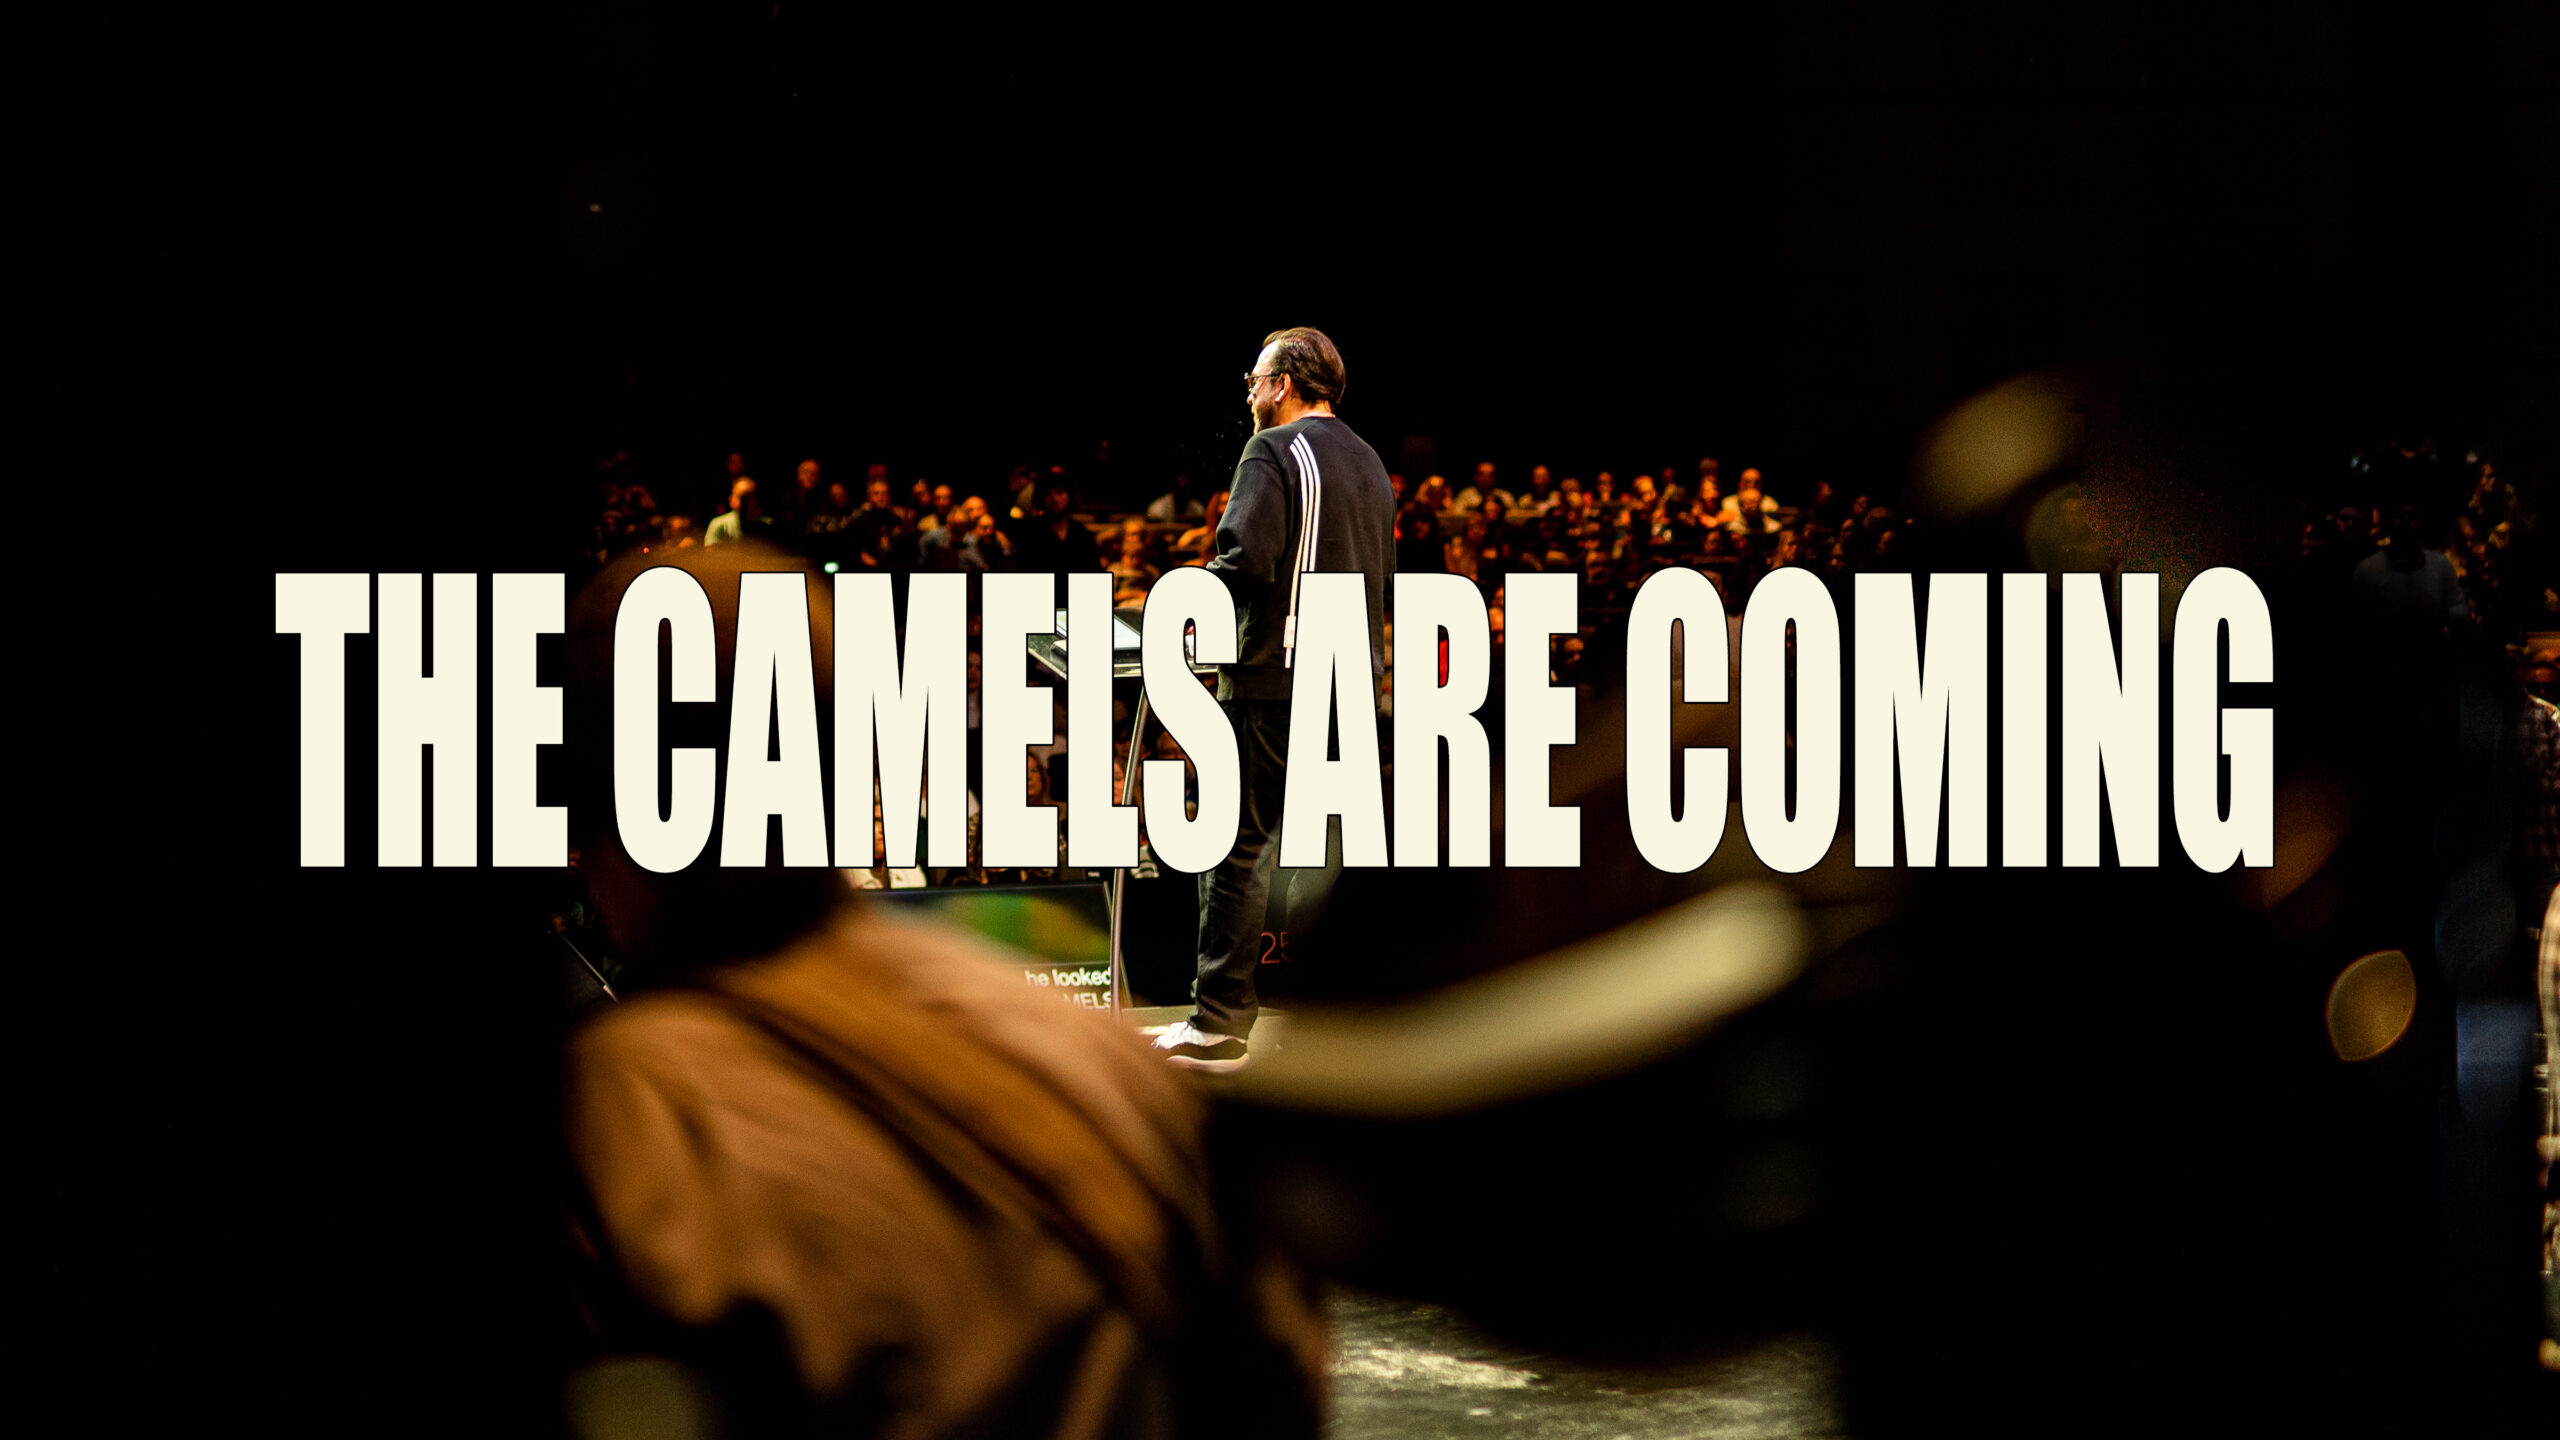 The Camels are Coming | Apostle Jim Raley